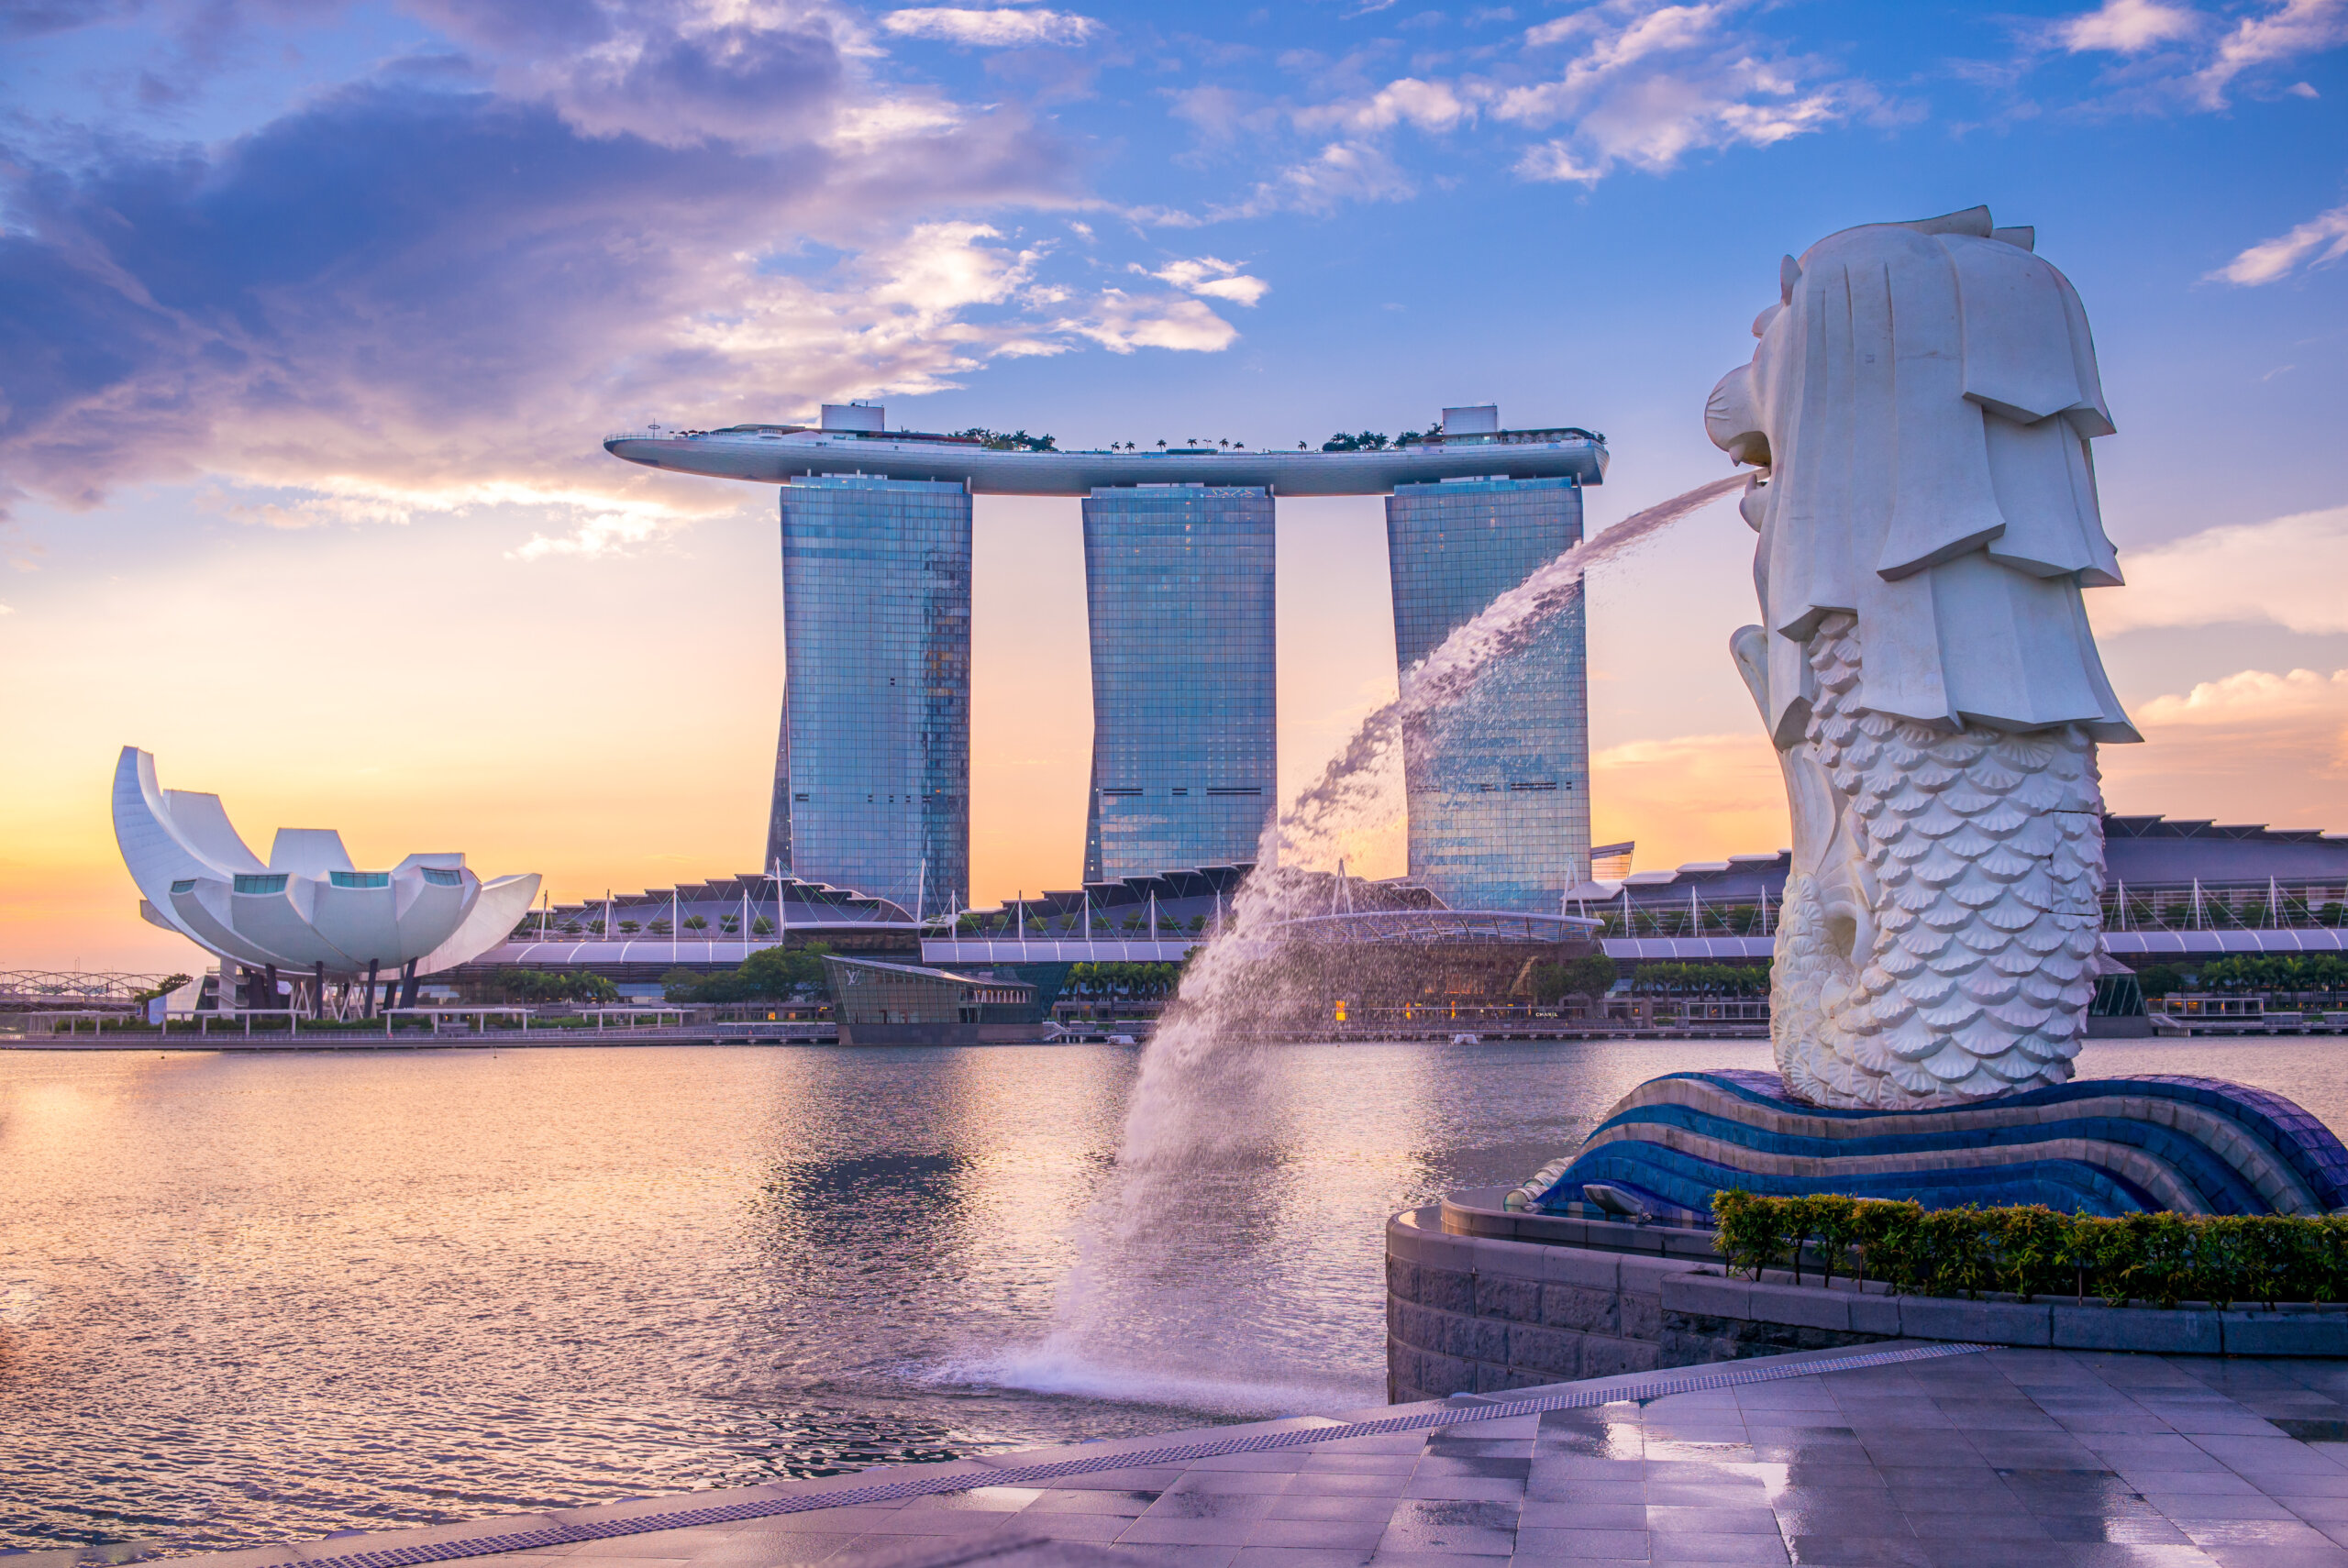 Singapore has unveiled significant investment in AI technology.